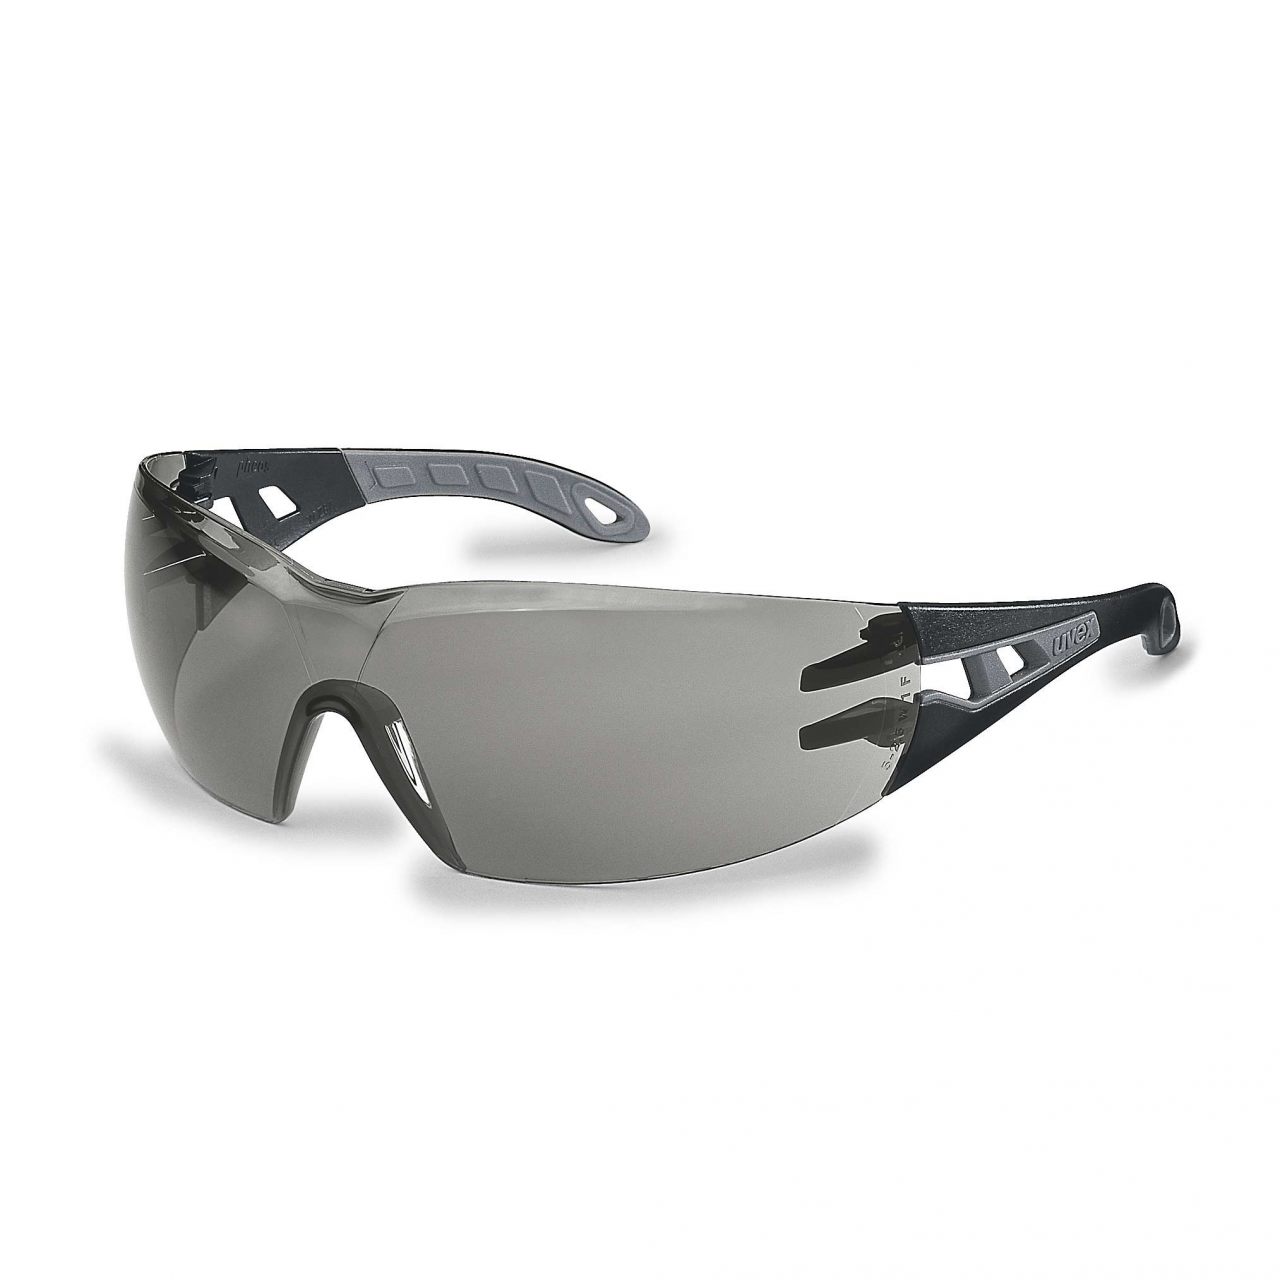 Uvex Pheos Safety Spectacles